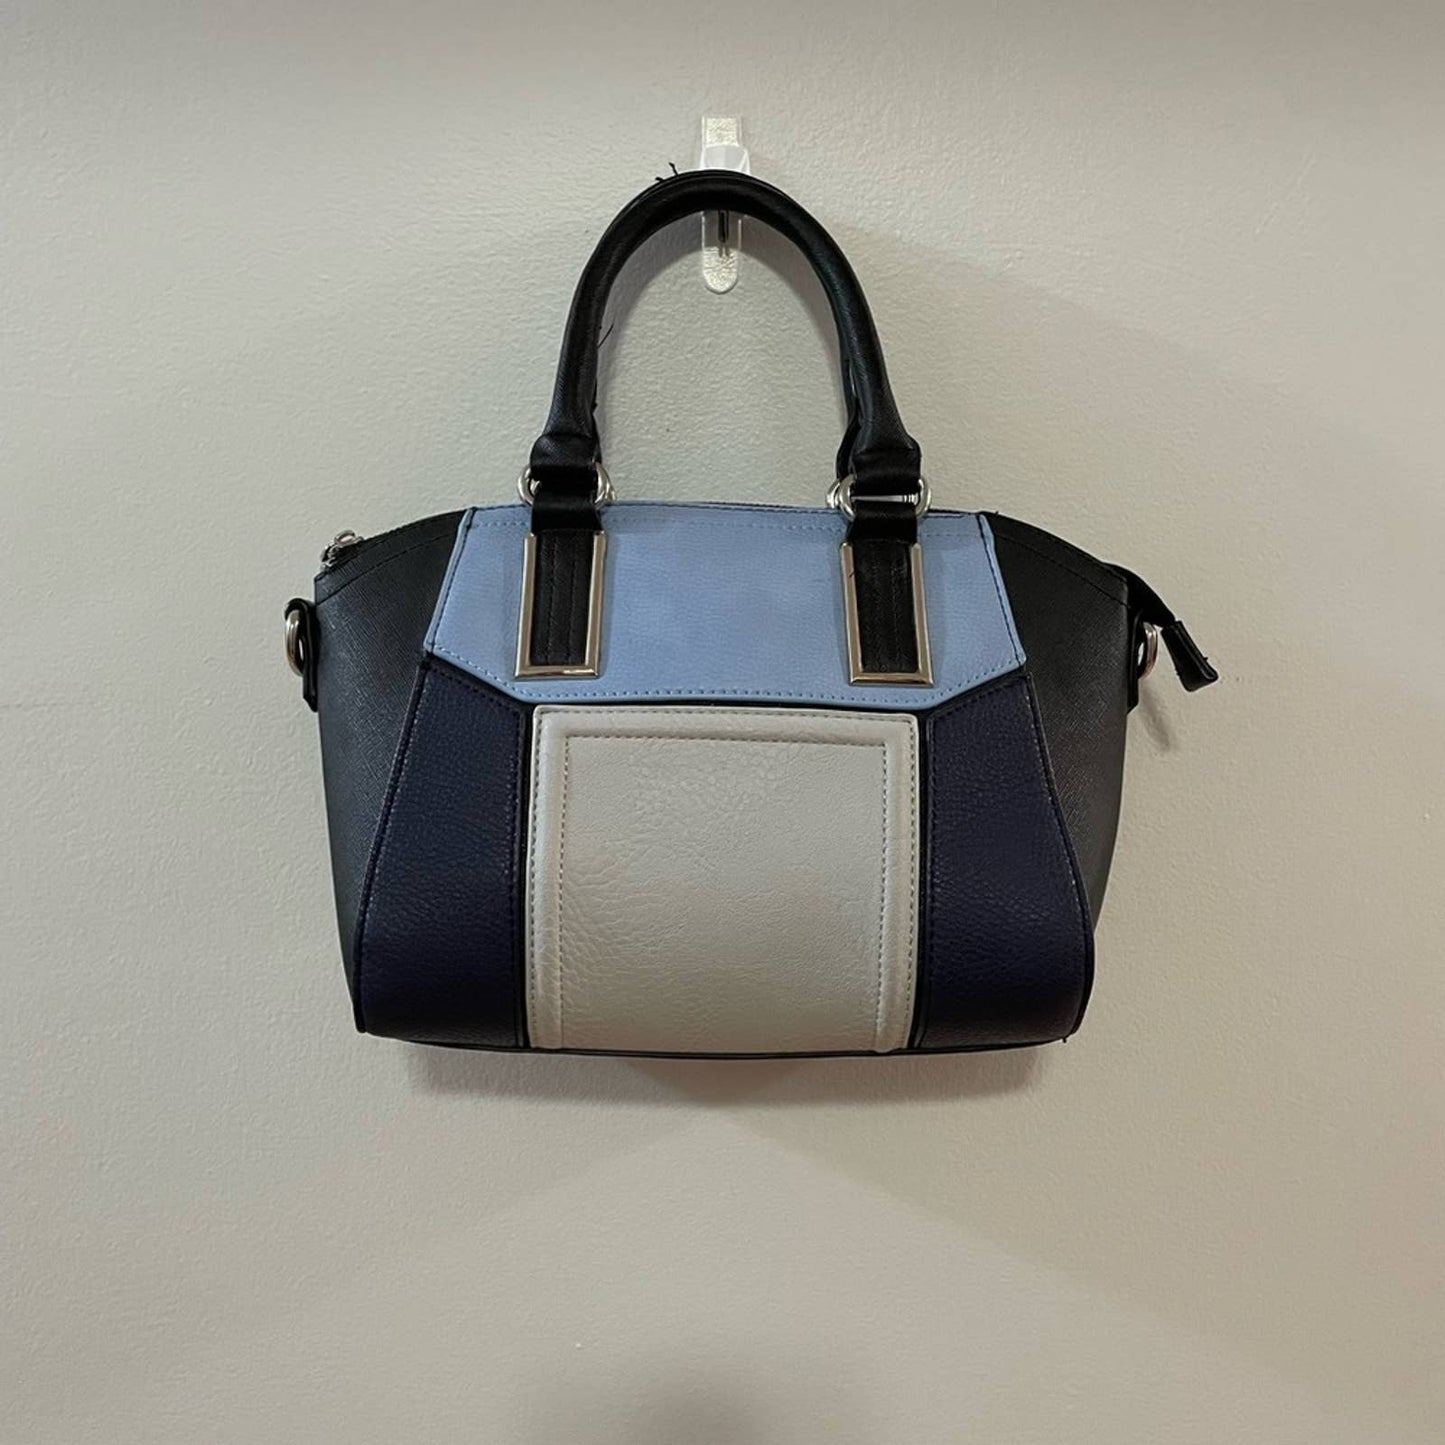 Charming Charlie Blue/Black/Gray Color Block Structure Hand Bag